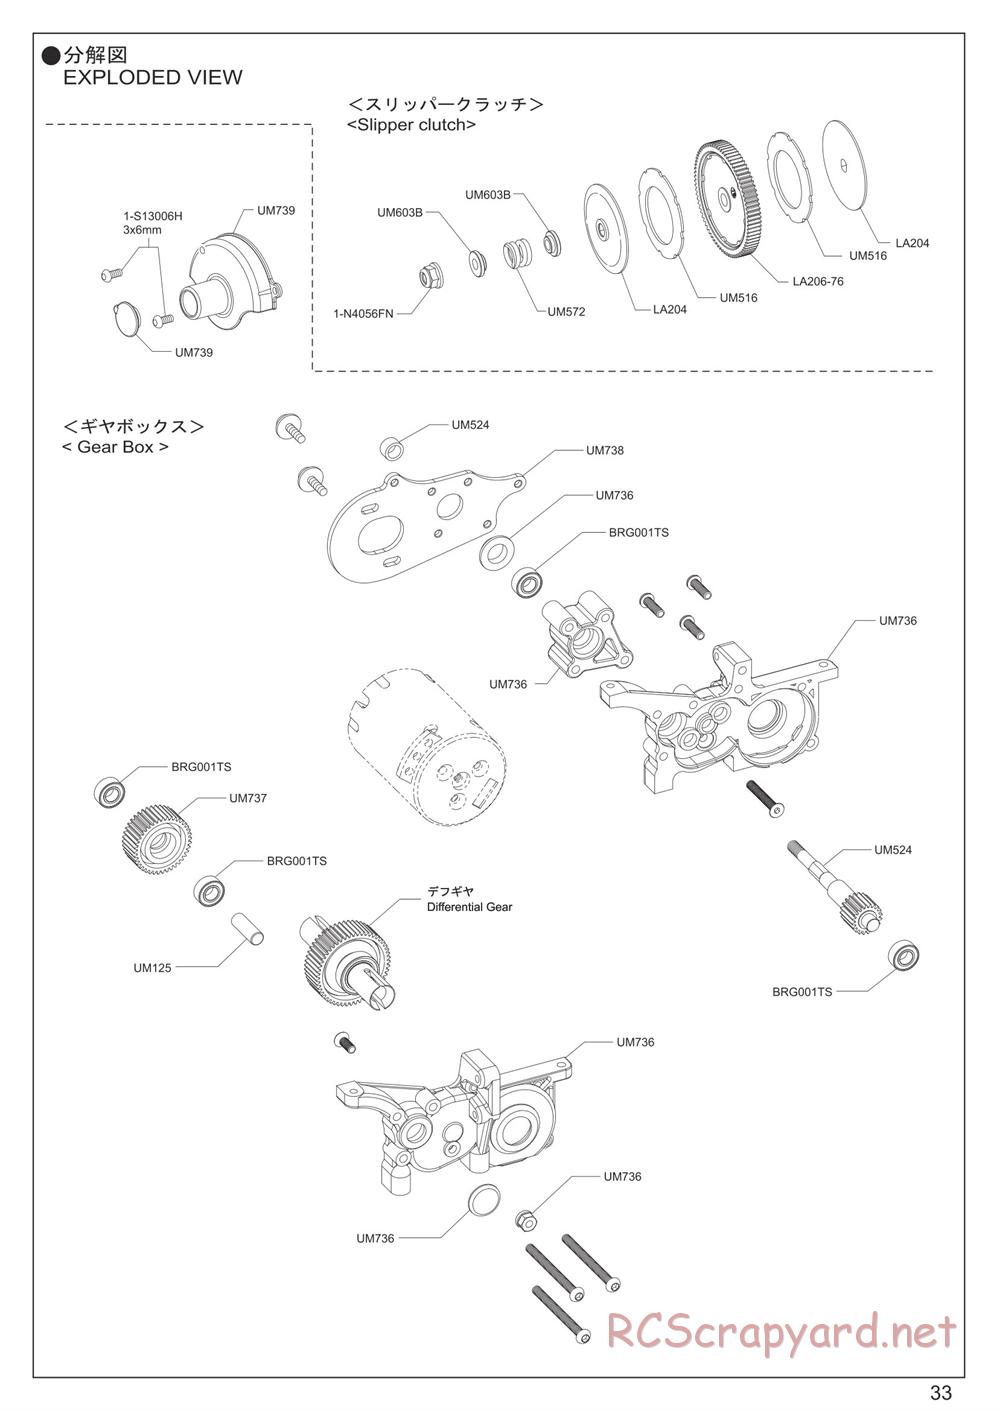 Kyosho - Ultima RB7 - Exploded Views - Page 3